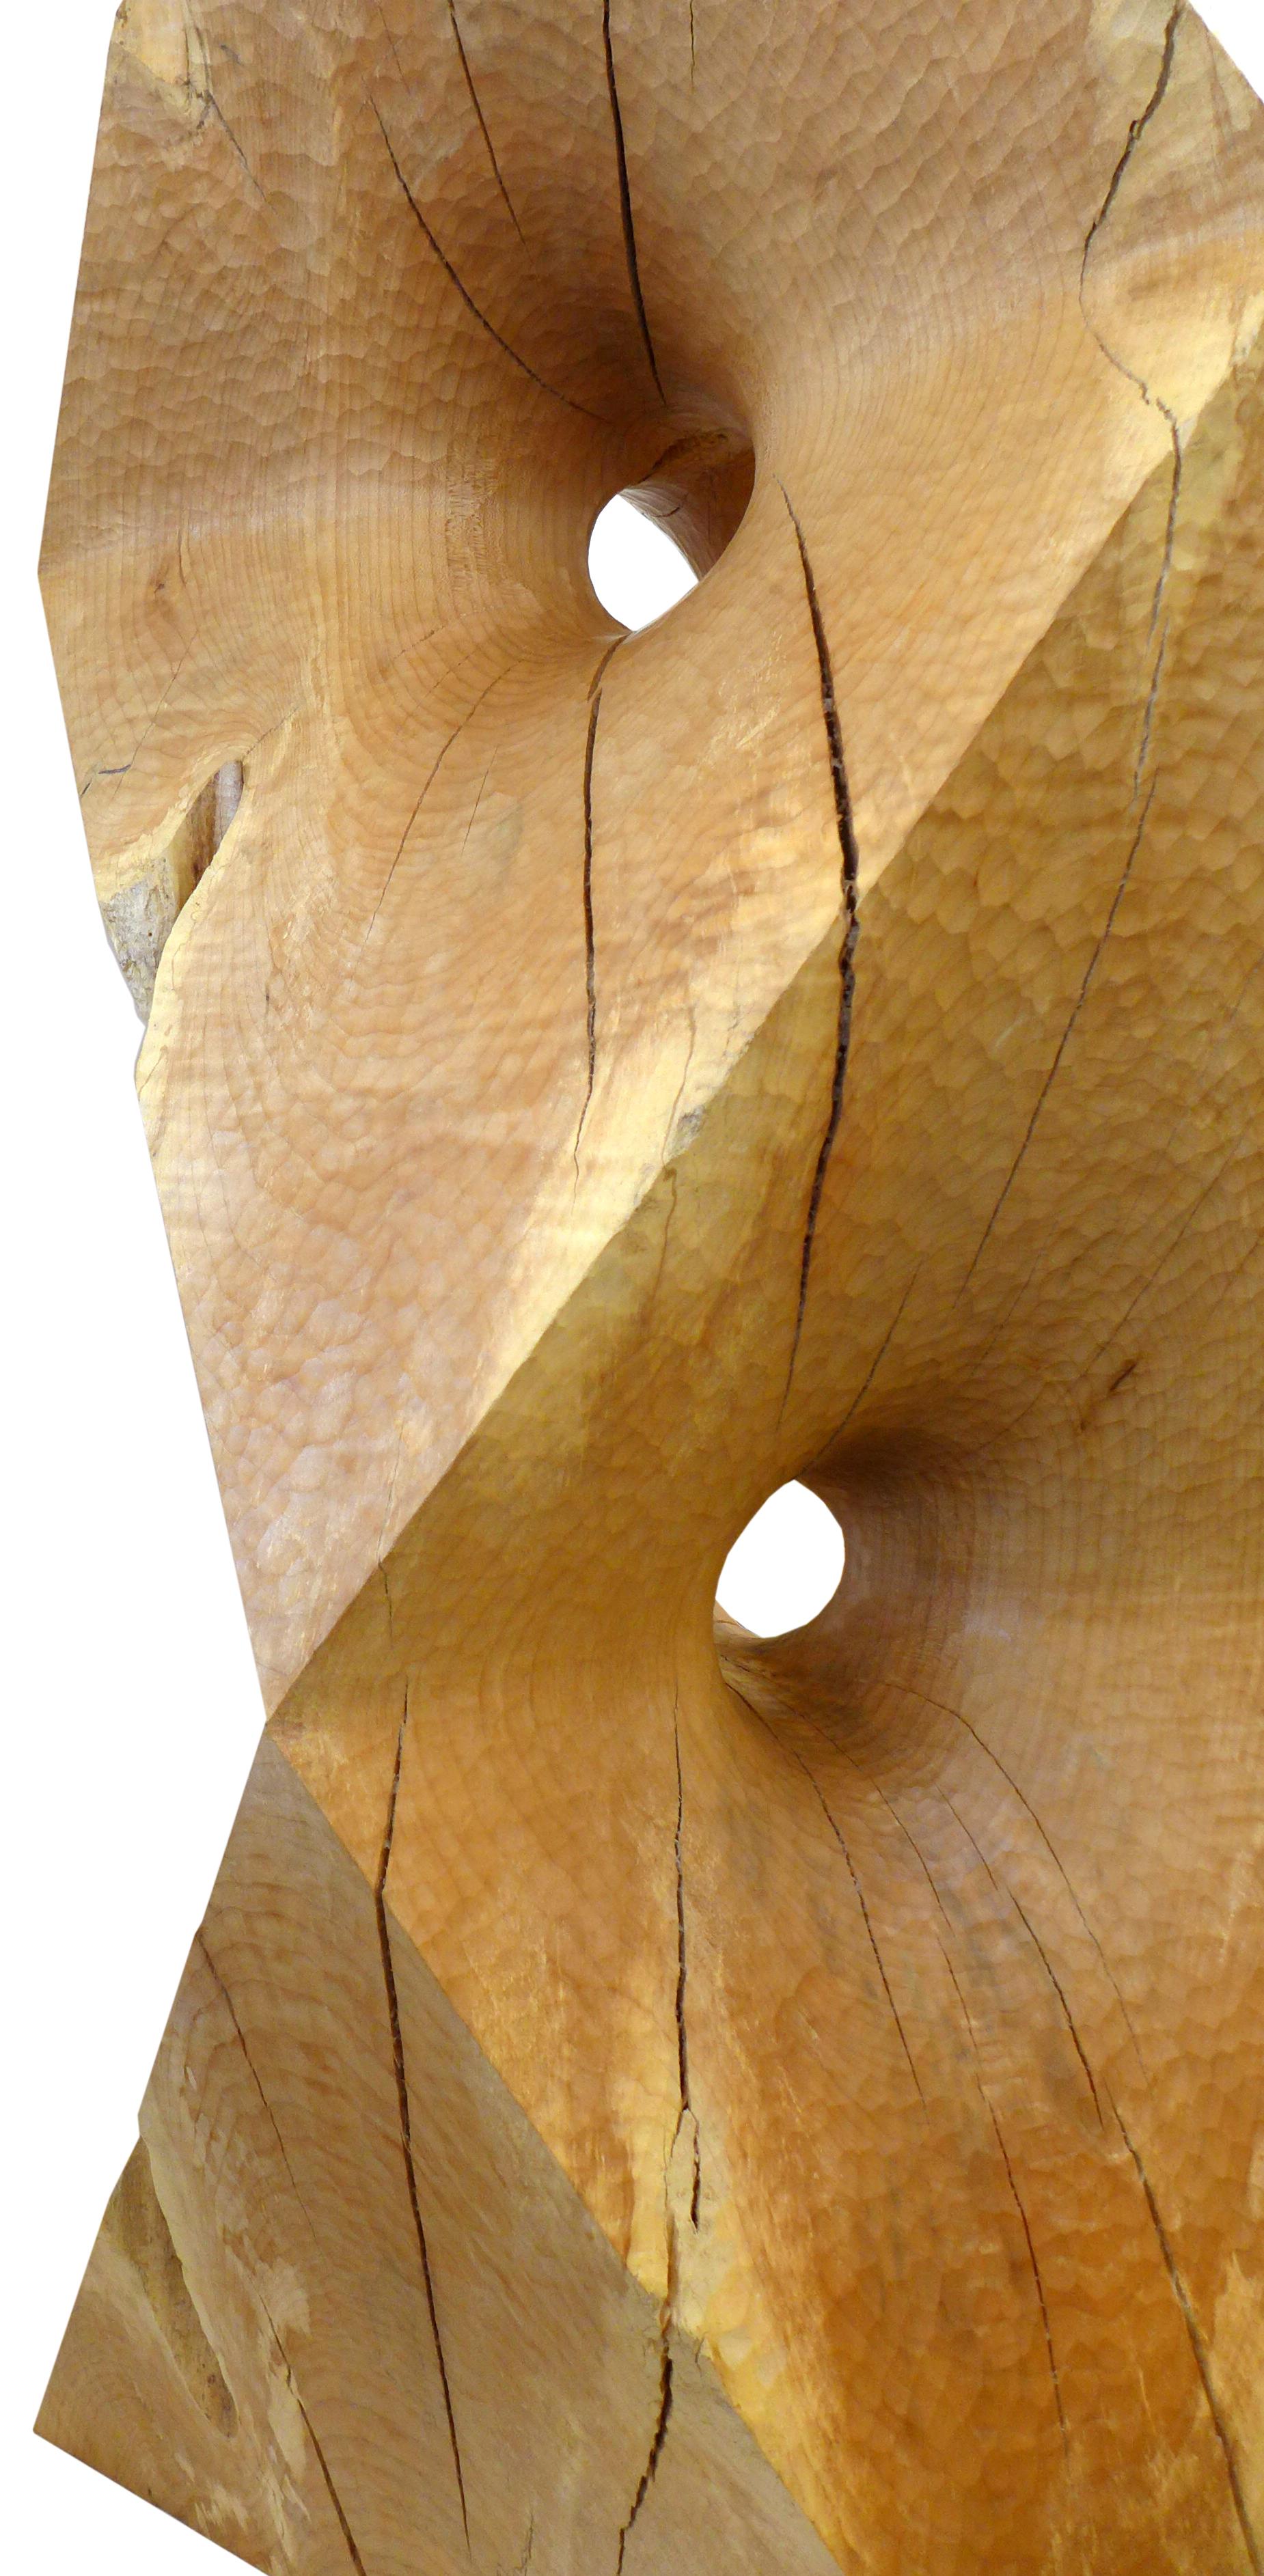 American Massive Octahedron Abstraction Sculpture in Big Leaf Maple by Aleph Geddis For Sale